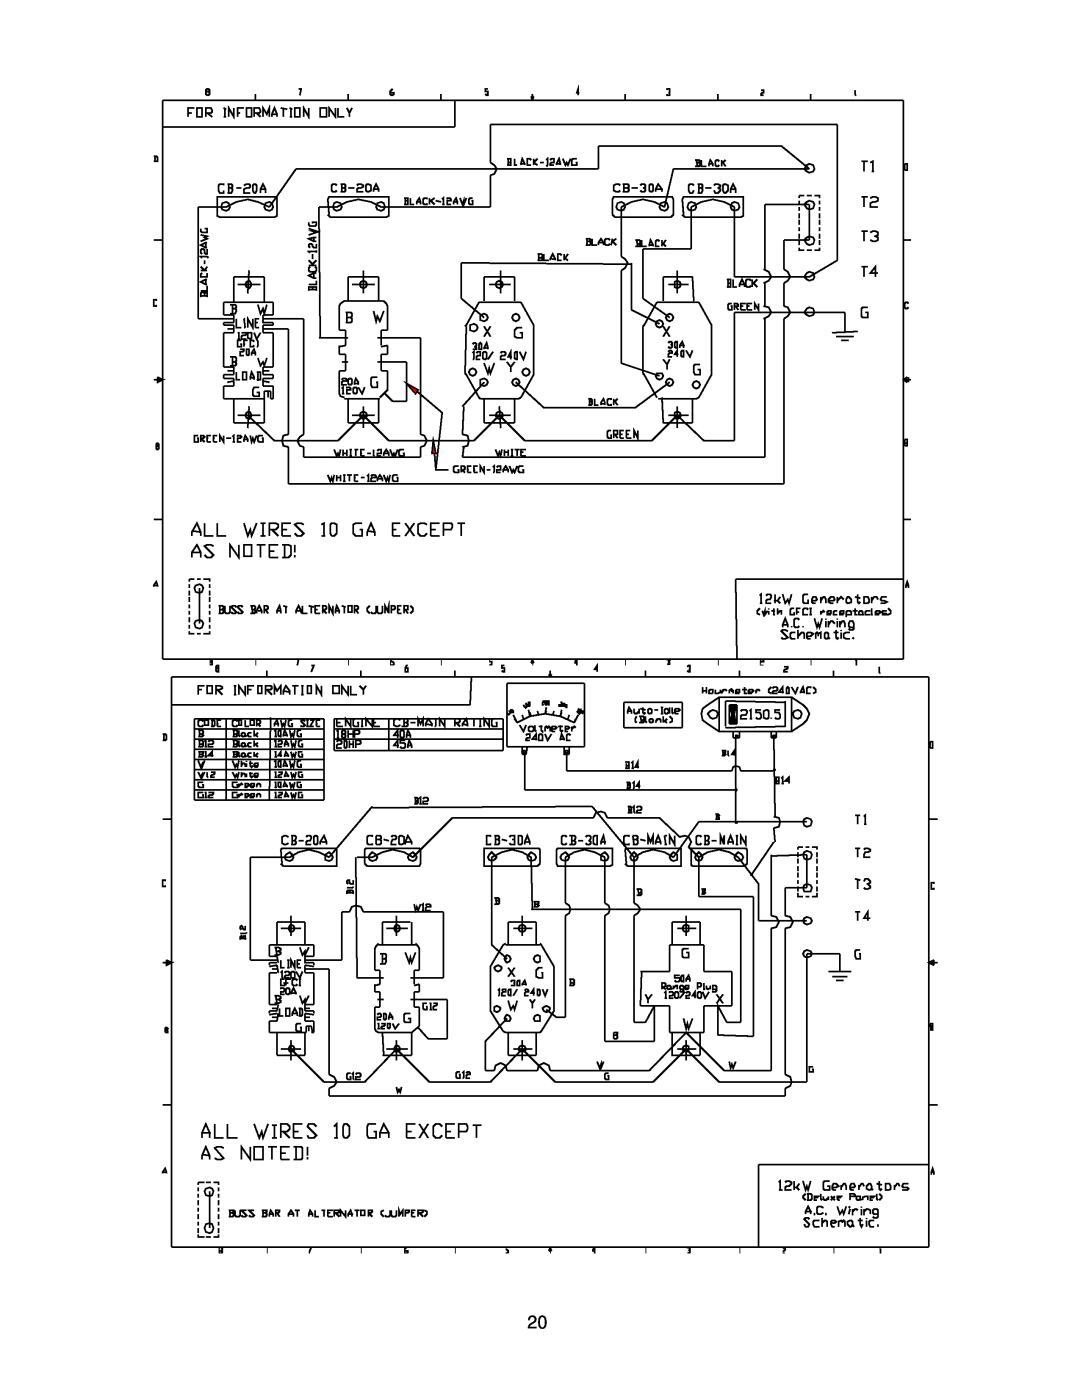 Chicago Electric 42728, 42727, 40814, 42723, 42724, 42725, 39461, 39982, 39984, 42726, 40827, 40423 user manual 